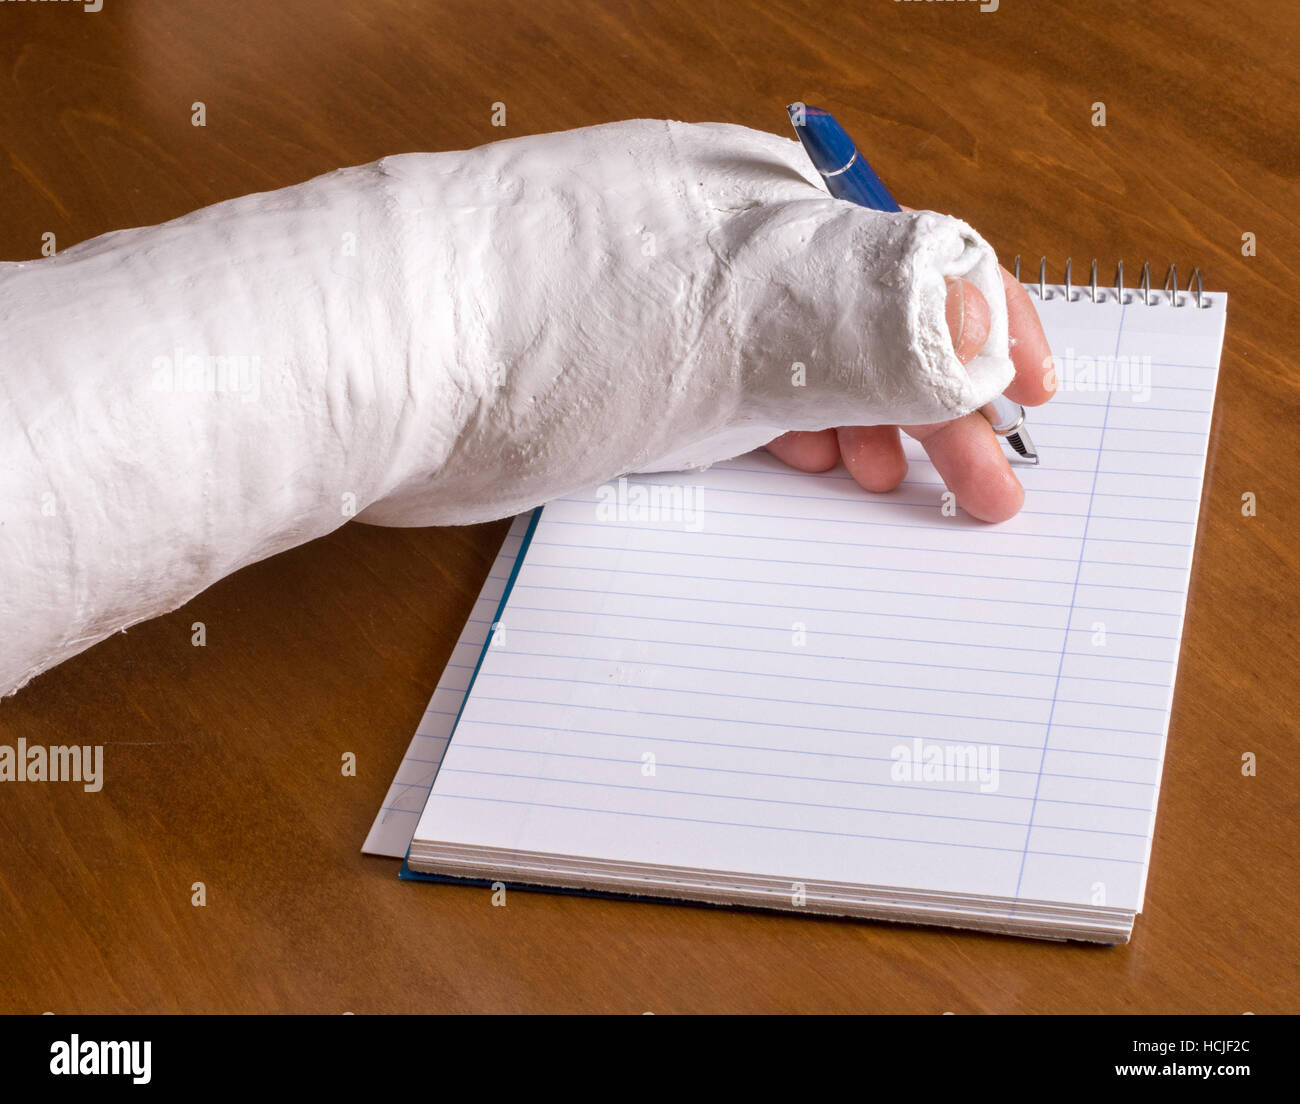 Person wearing an arm cast after breaking their wrist trying to write a note on a piece of paper Stock Photo